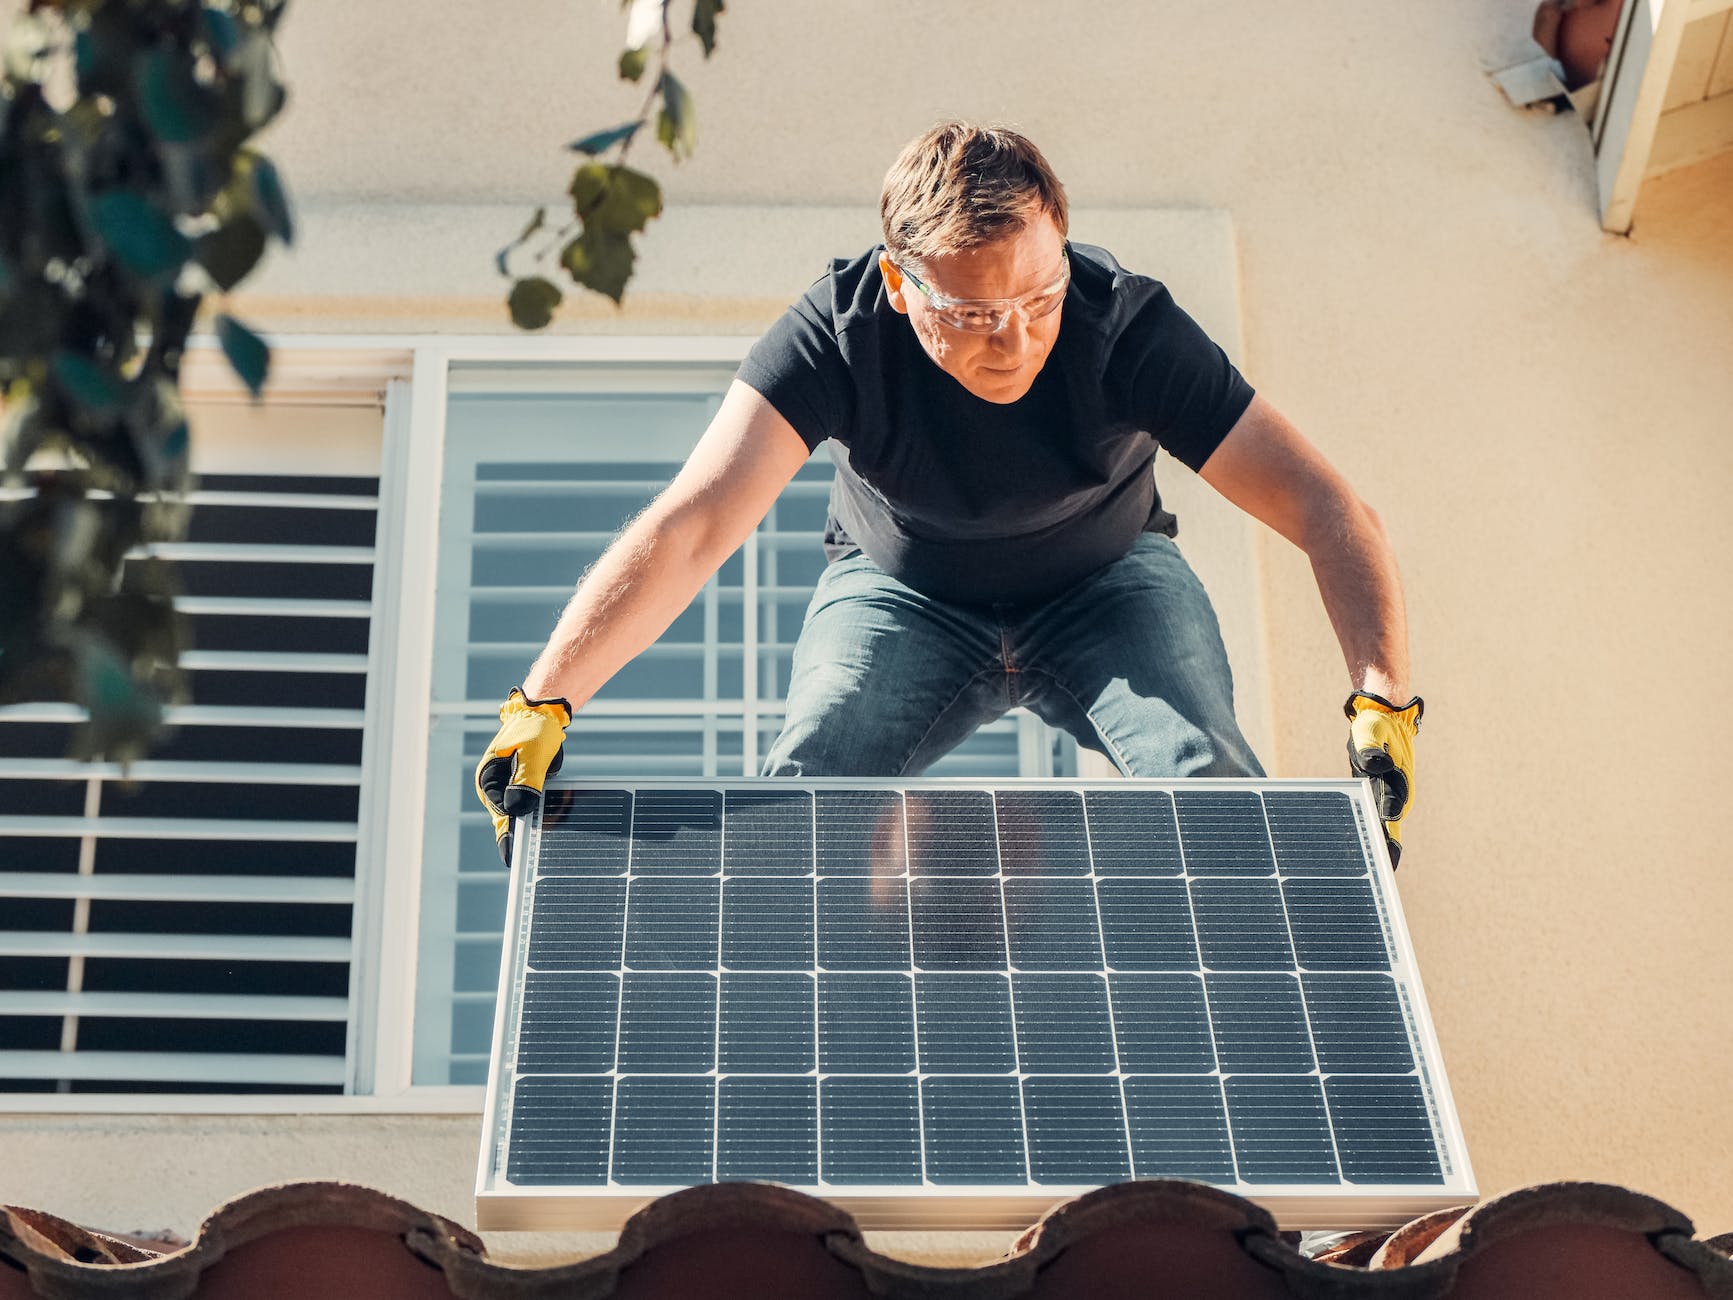 Whether or not installing solar panels at home is worth it depends on a variety of factors, such as your location, energy usage, and the cost of electricity in your area. Here are some points to consider